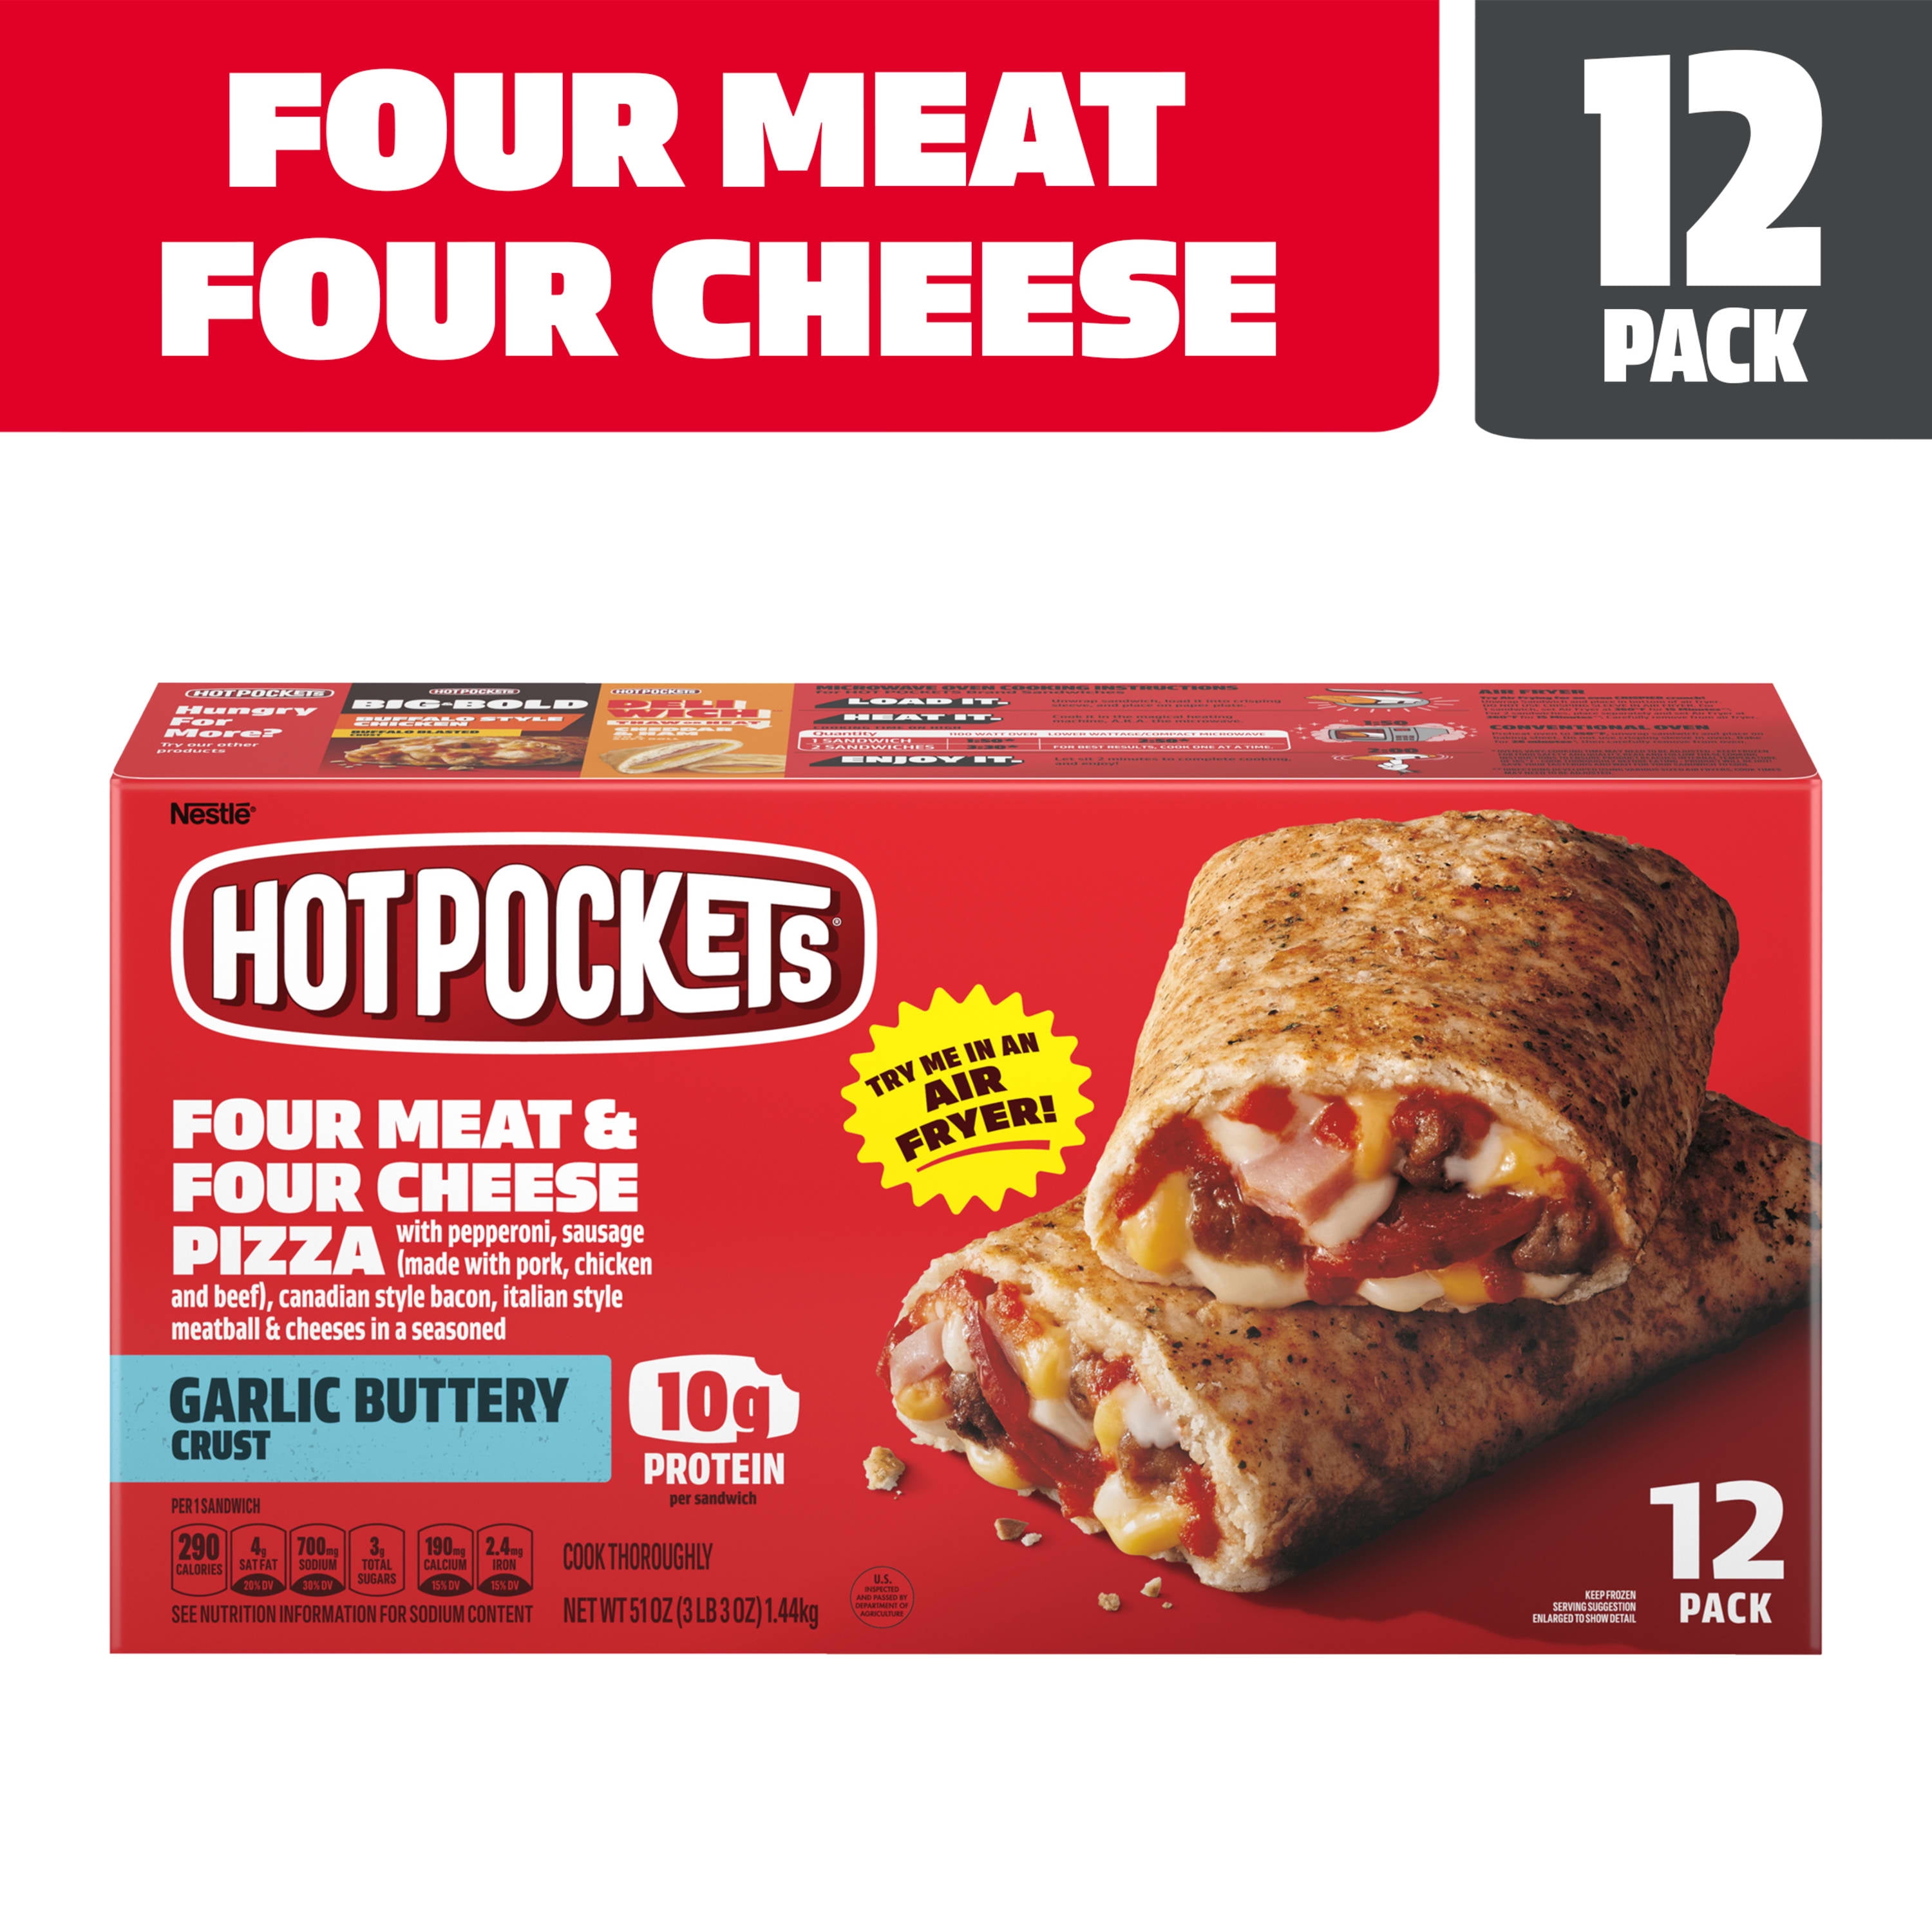 Hot Pockets Four Meat and Four Cheese Pizza Garlic Buttery Crust Frozen Snacks, Pizza Snacks Made with Mozzarella Cheese, 51 Oz, 12 Count Frozen Sandw 51 oz